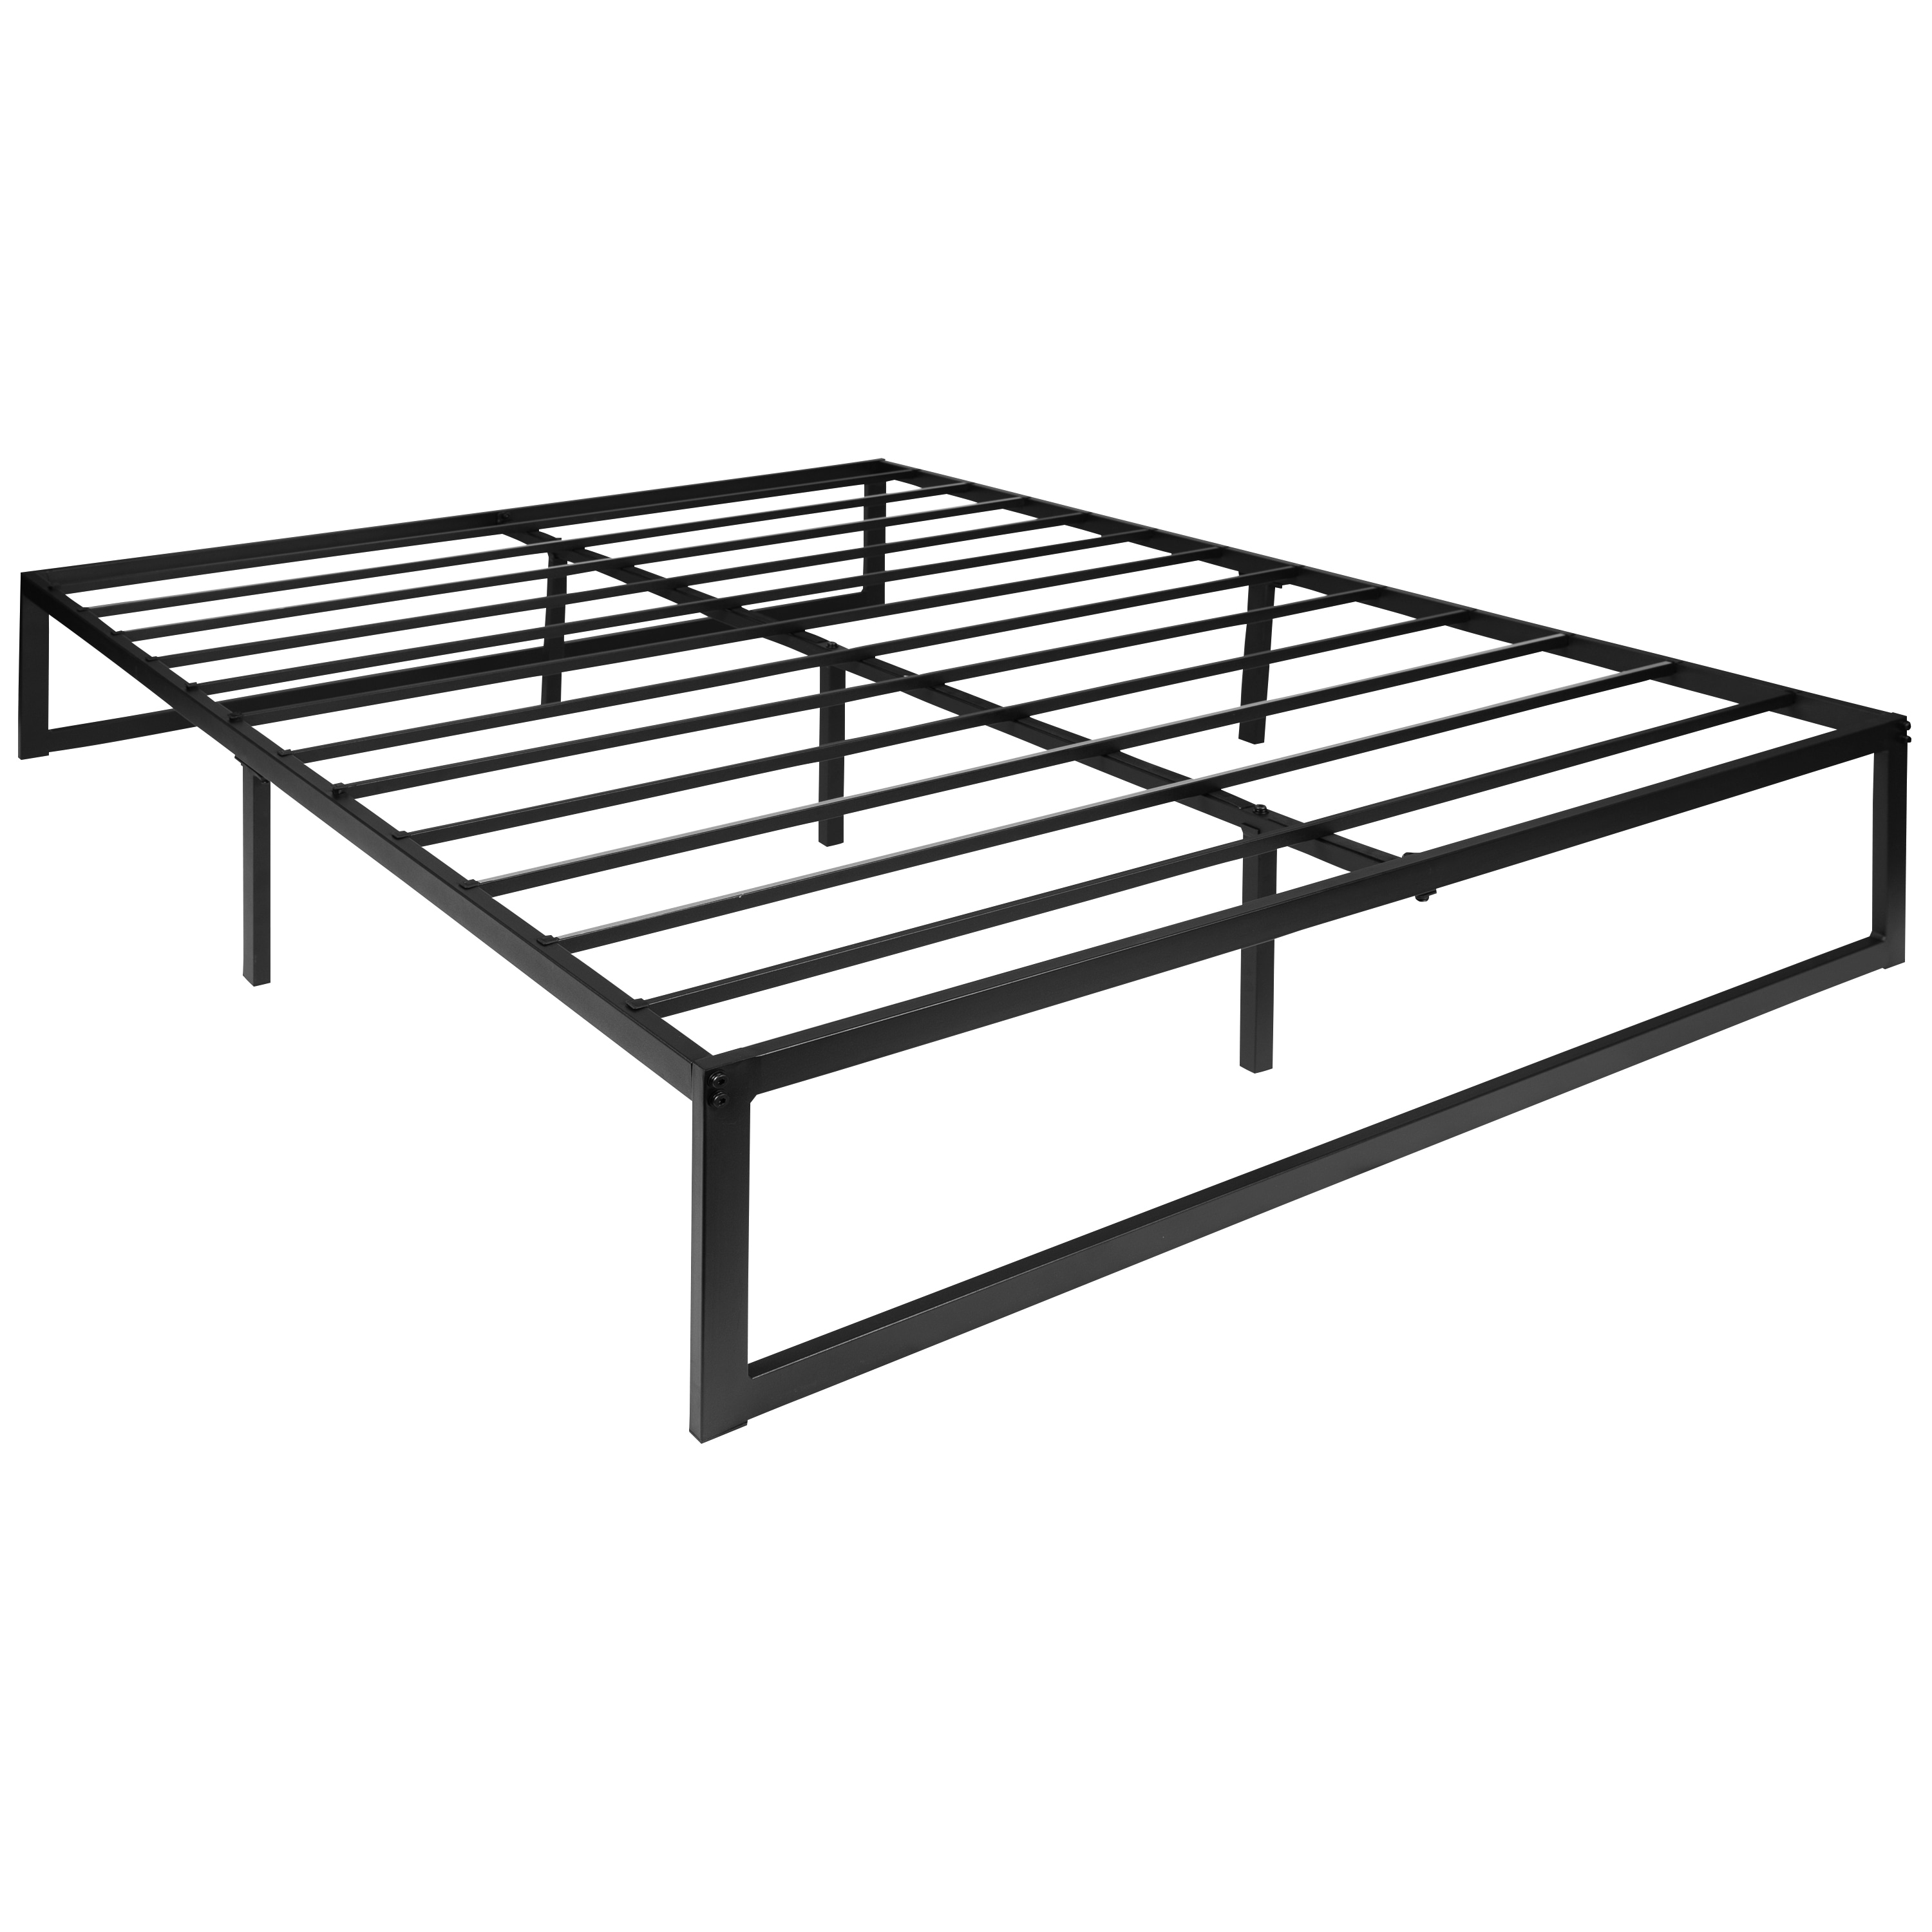 Queen Bed Frame Clearance Sale | lupon.gov.ph